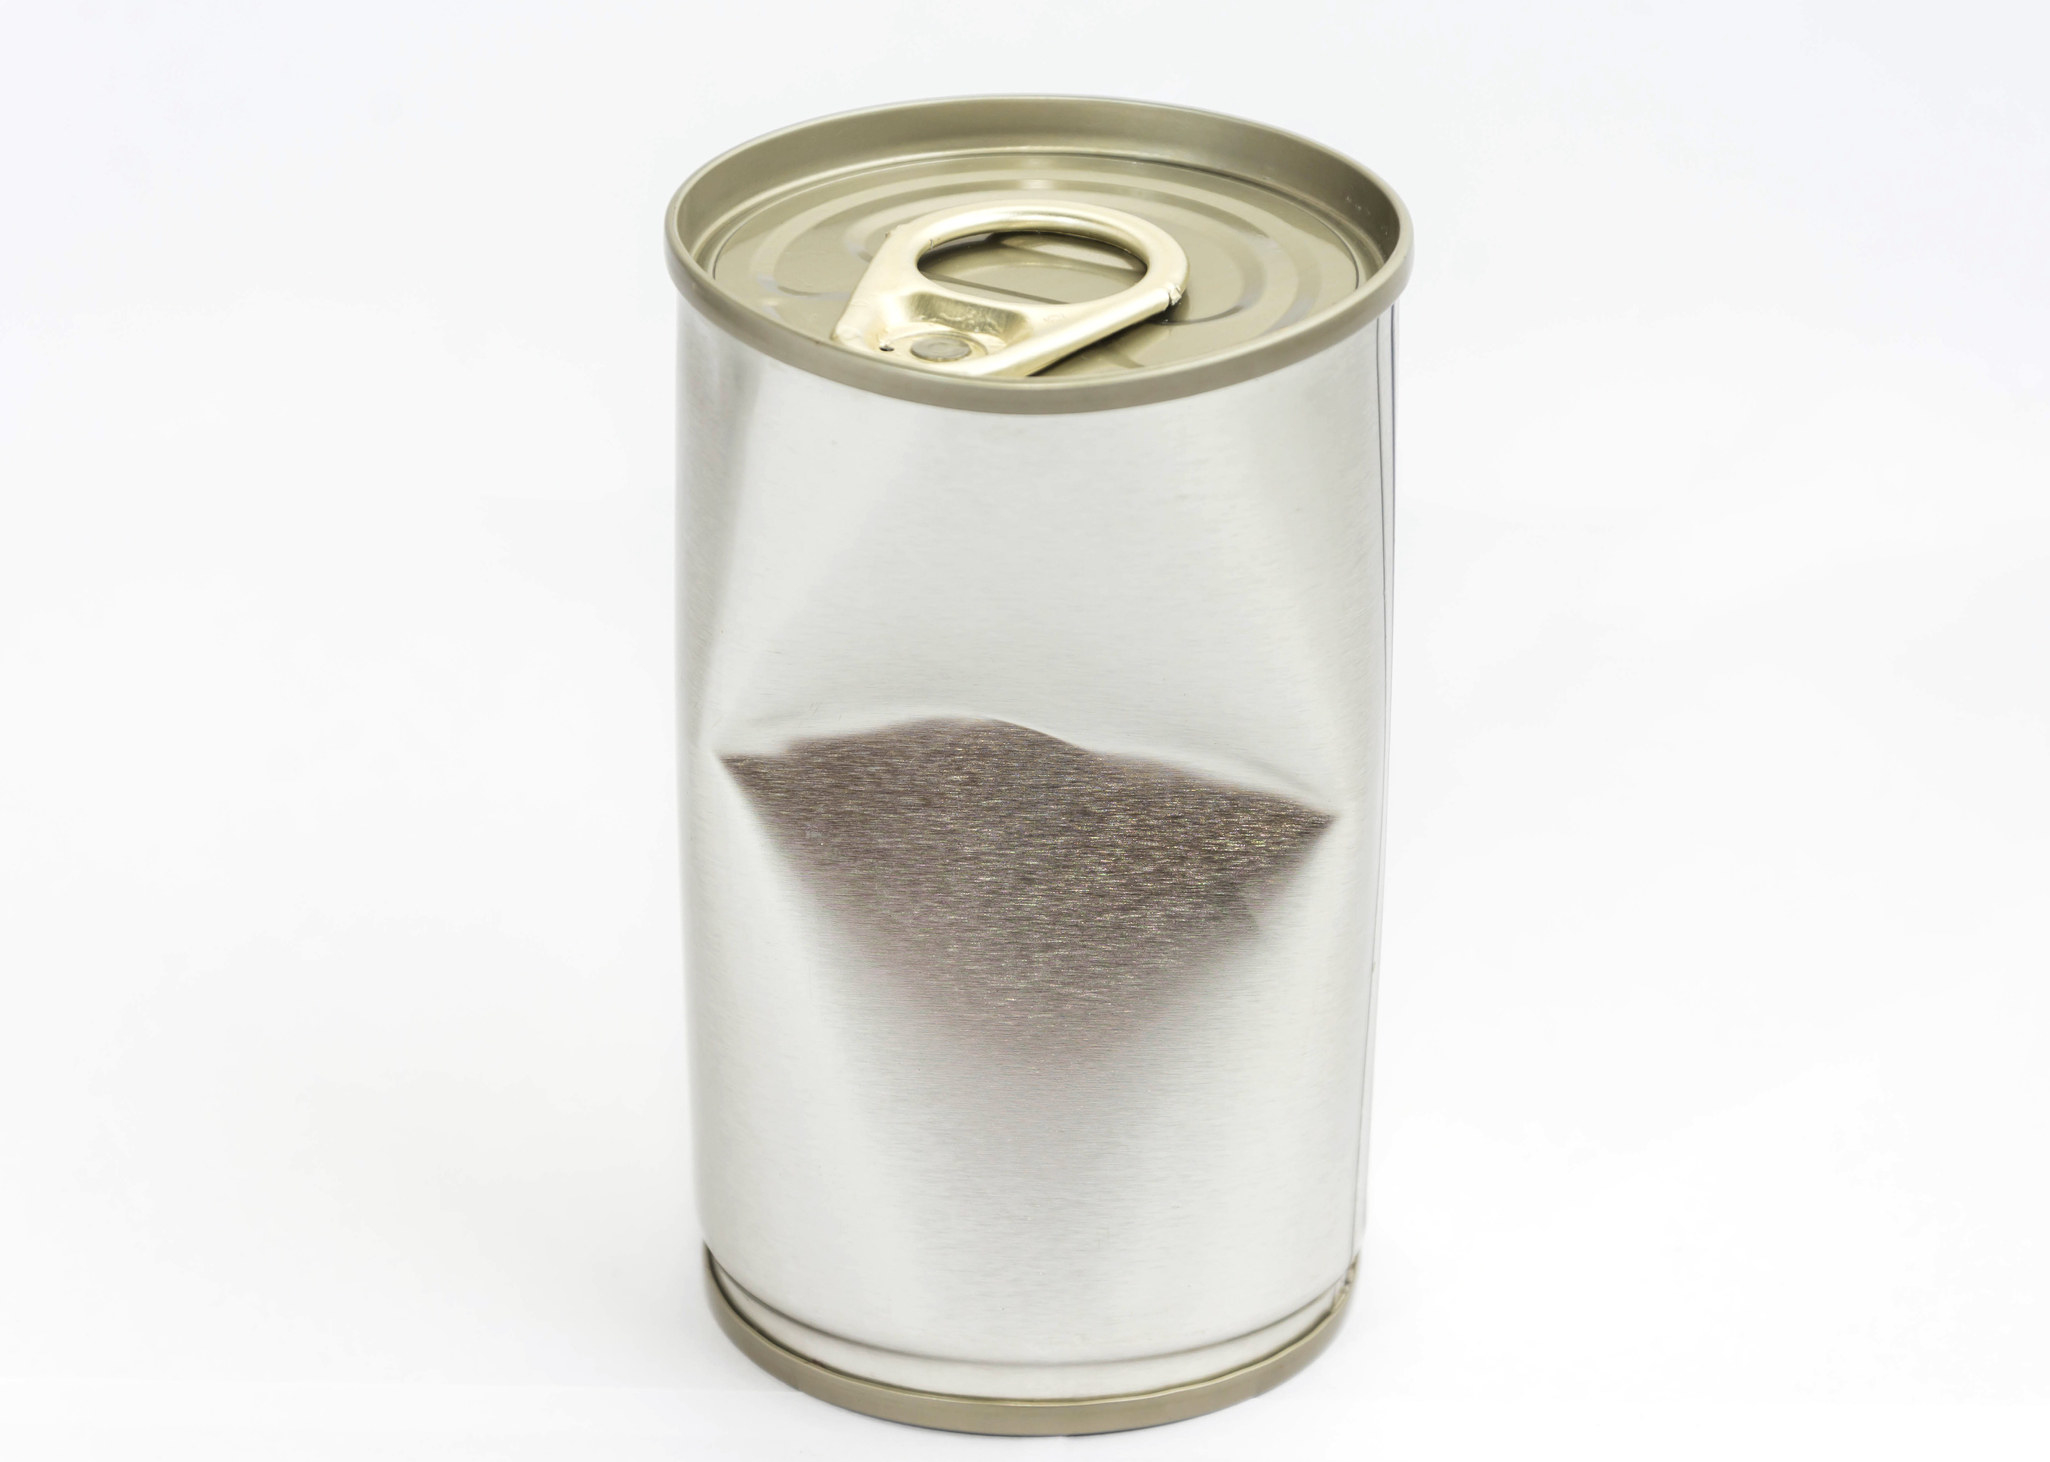 A can with a deep dent